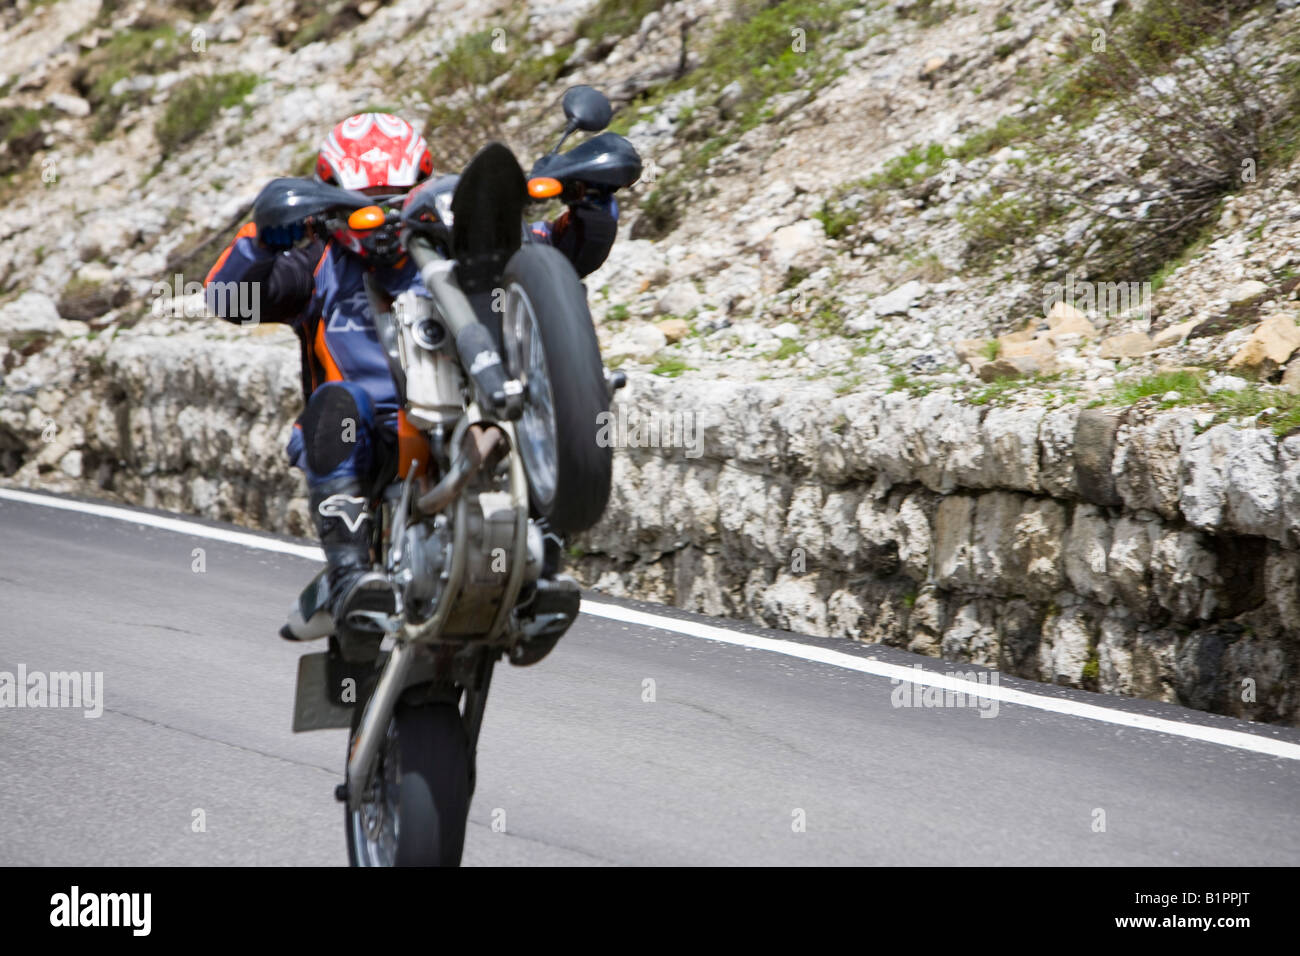 A motorbike rider showing off pulling a wheely in the Italian Dolomites on a mountain road Stock Photo